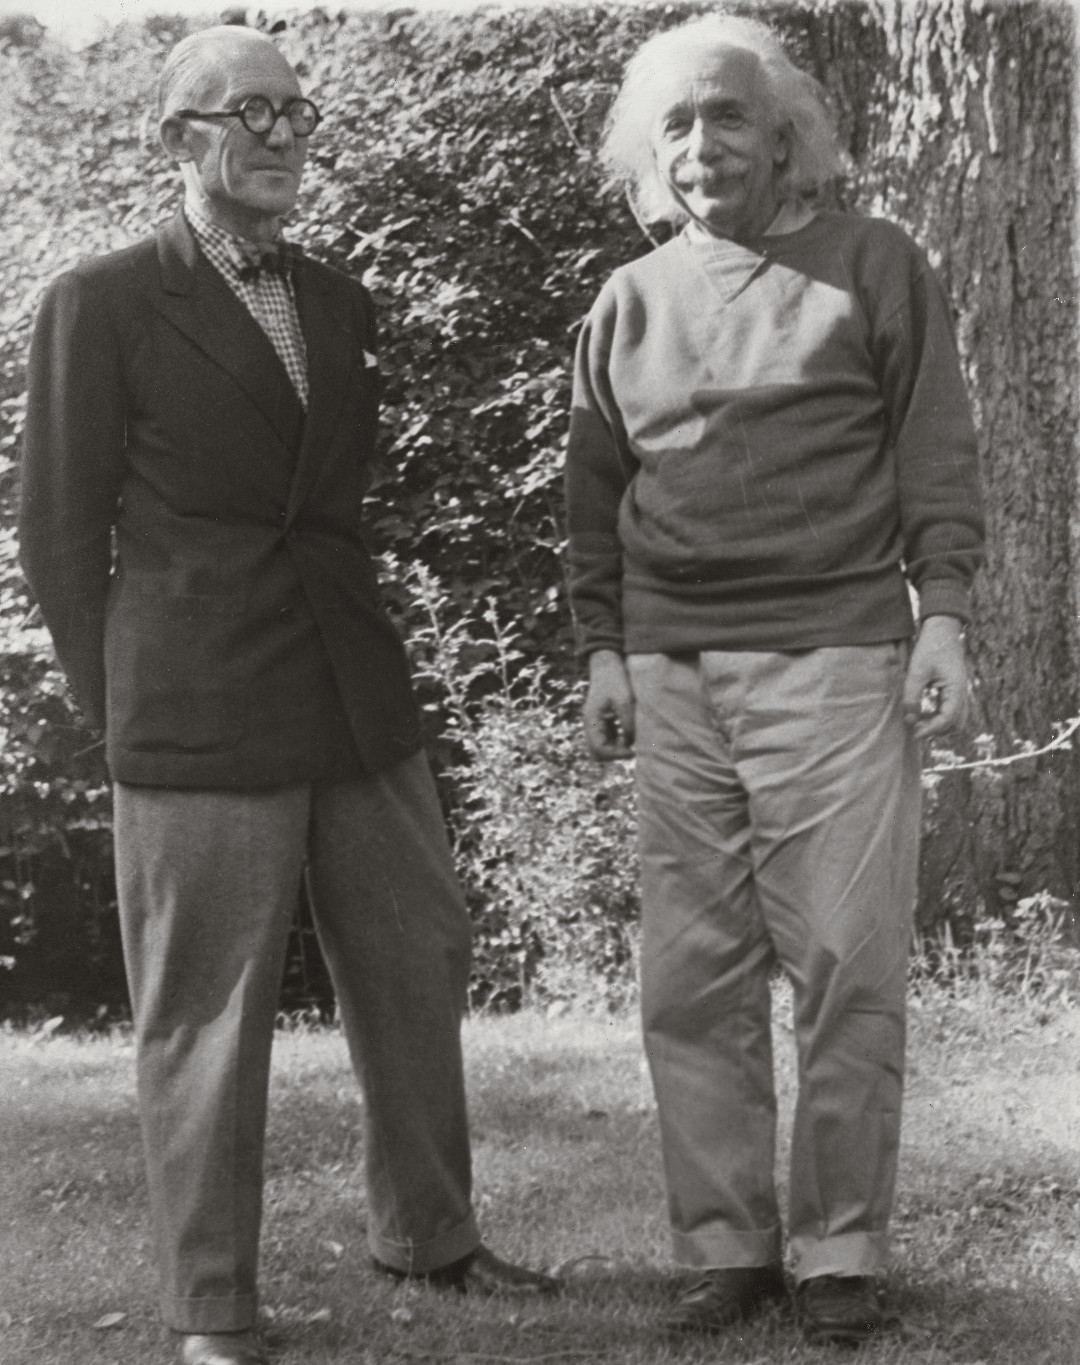 Le Corbusier with Albert Einstein in Princeton, New Jersey, 1946. Picture credit: courtesy Fondation Le Corbusier, Paris. As reproduced in Le Corbusier Le Grand